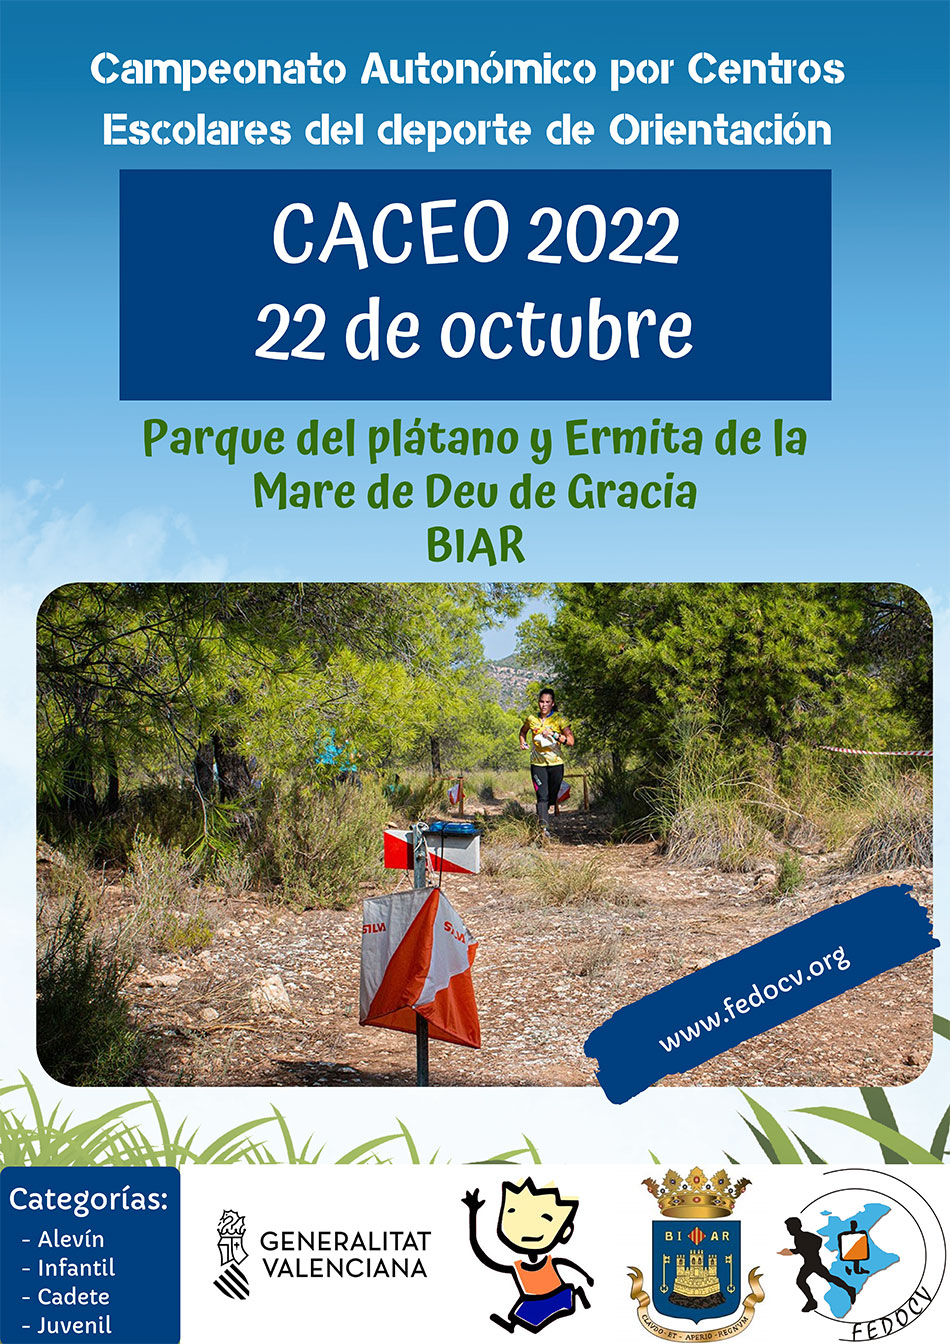 CACEO 2022